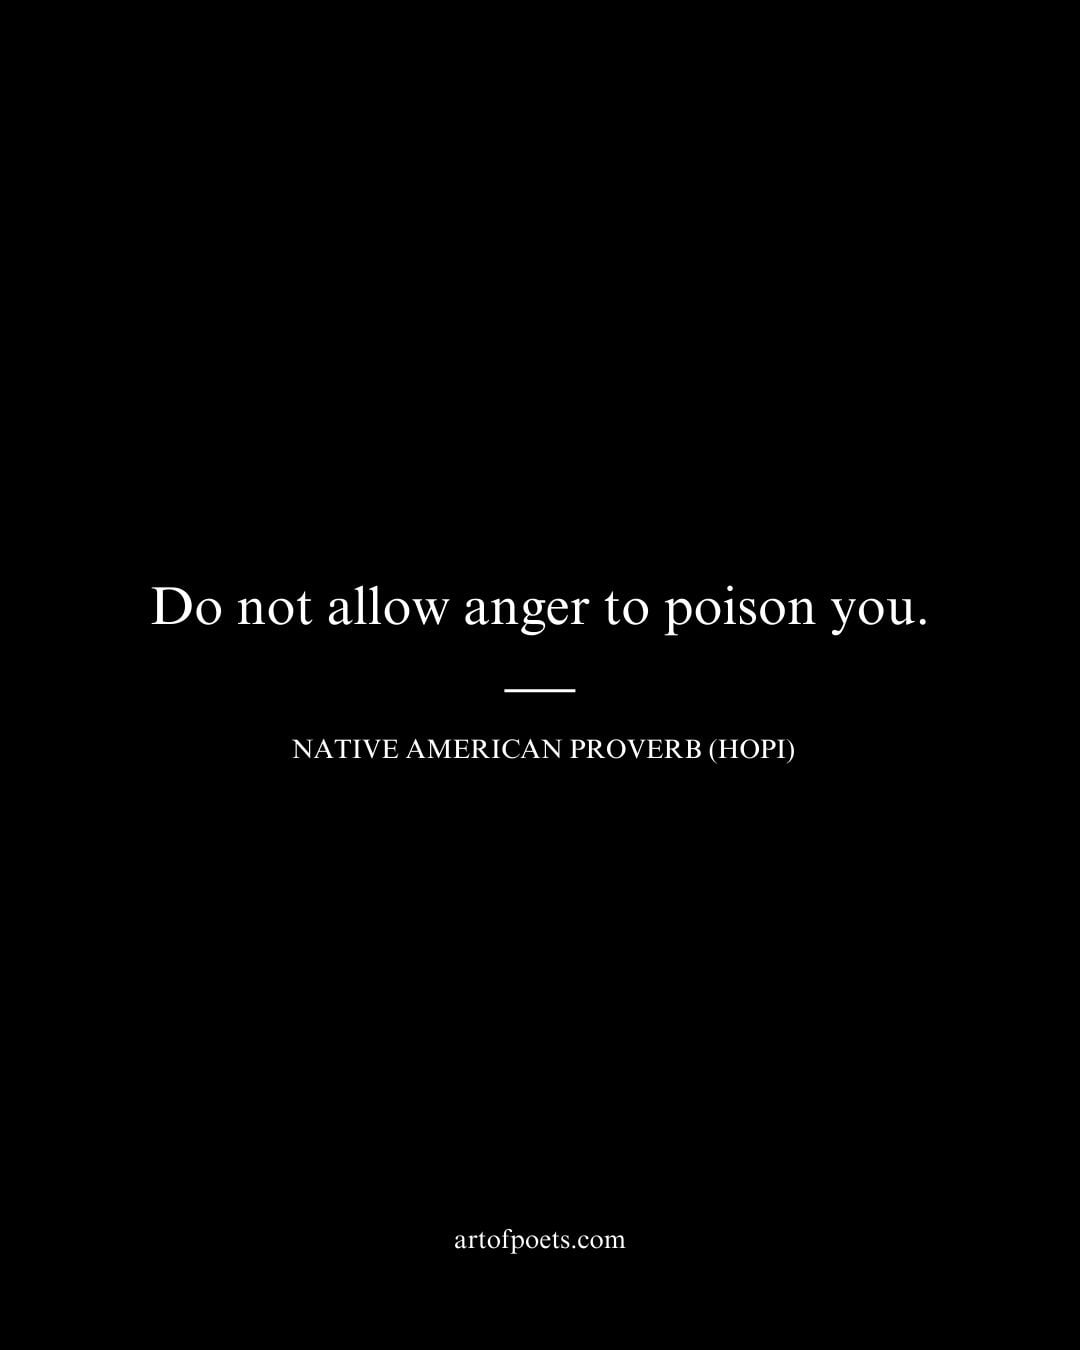 Do not allow anger to poison you